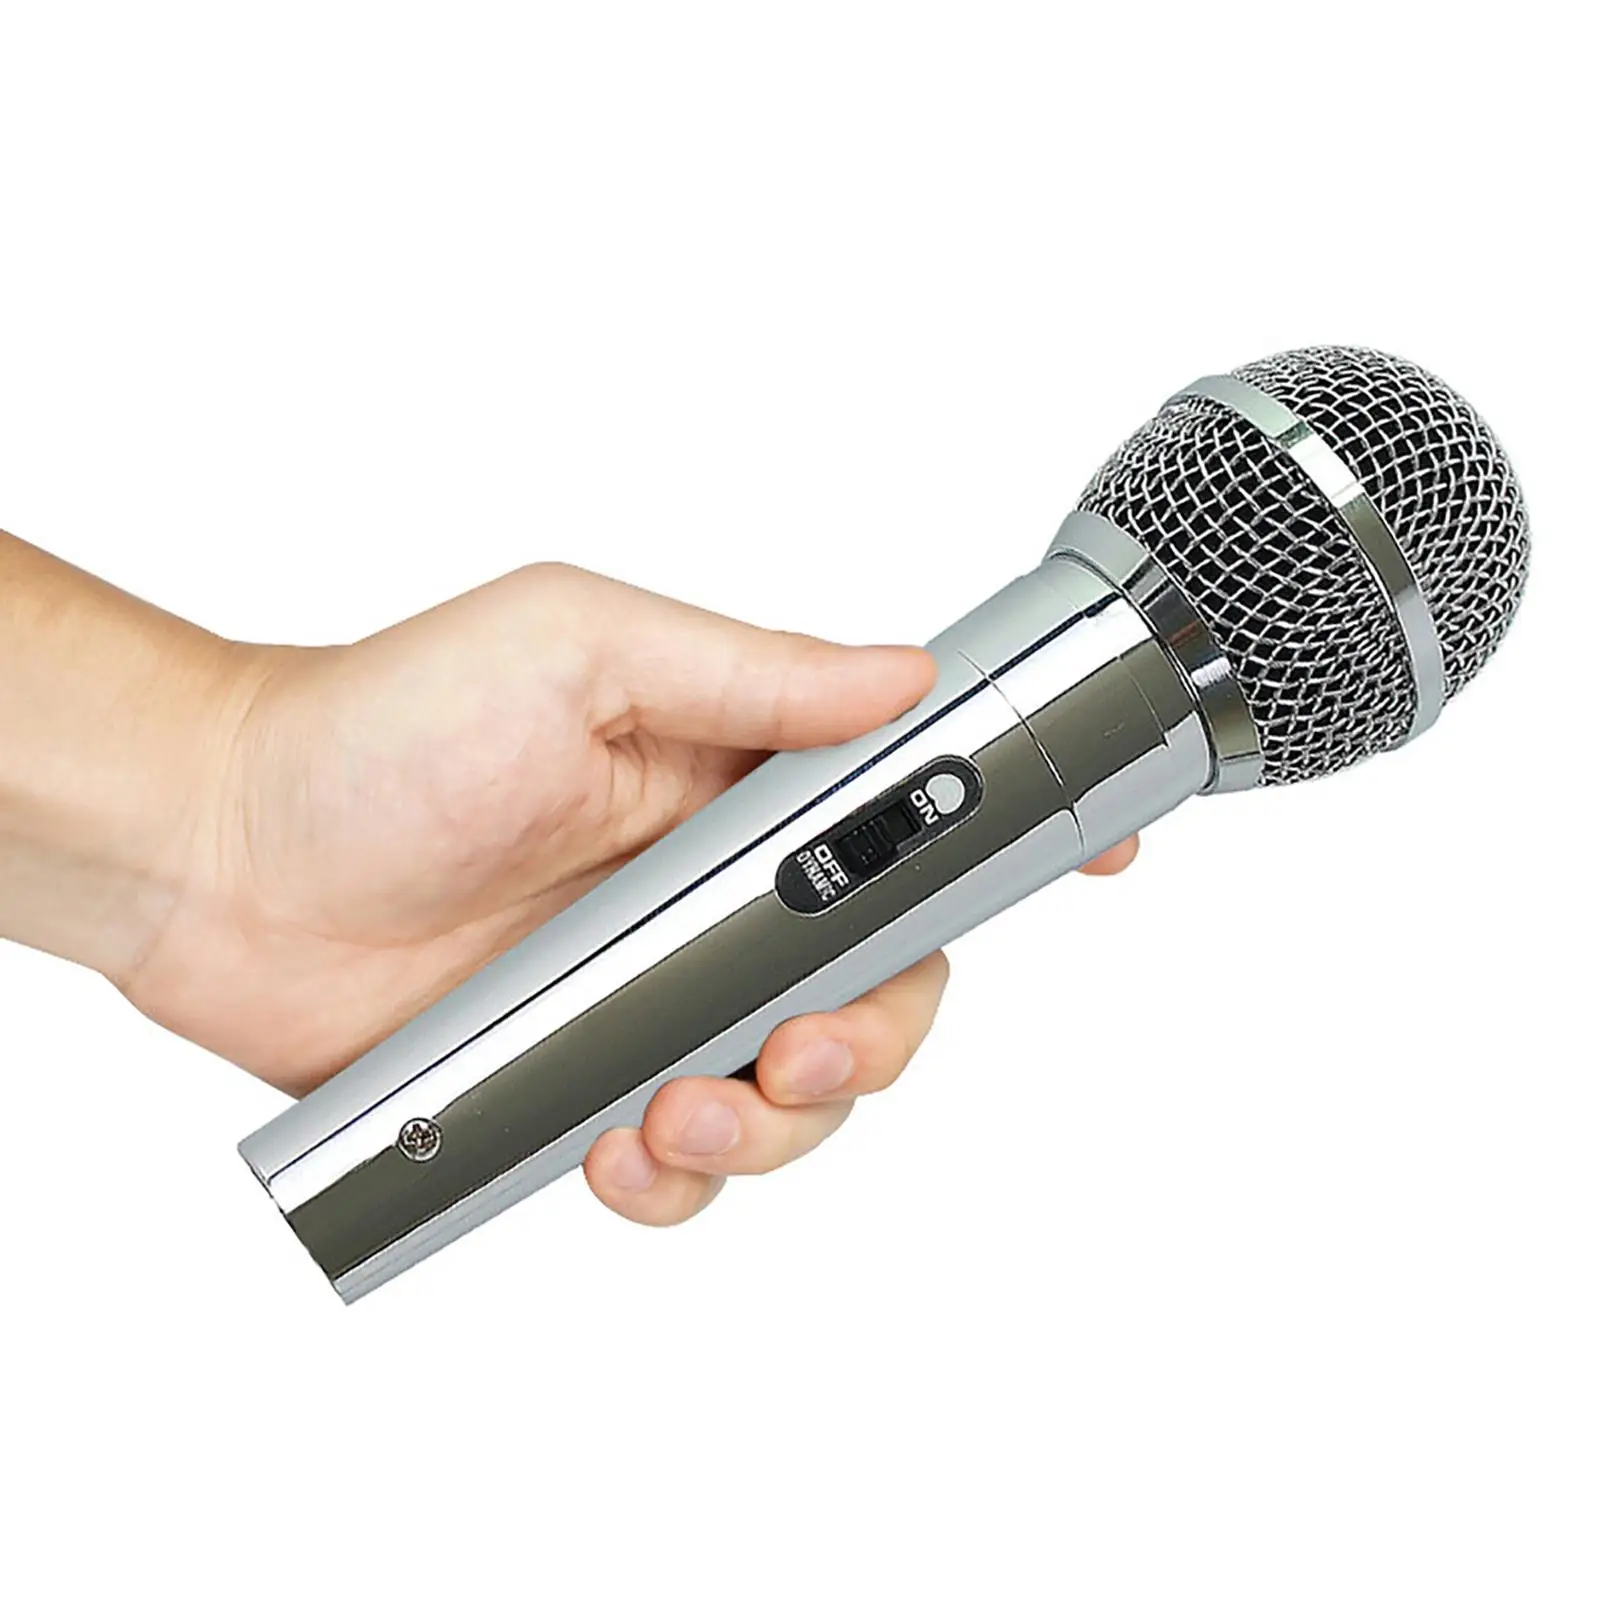 Karaoke Microphone with 3M Cable Noise Reduction Vocal Dynamic Mic Wired Handheld Mic for Stage Home Wedding Speaker Meeting